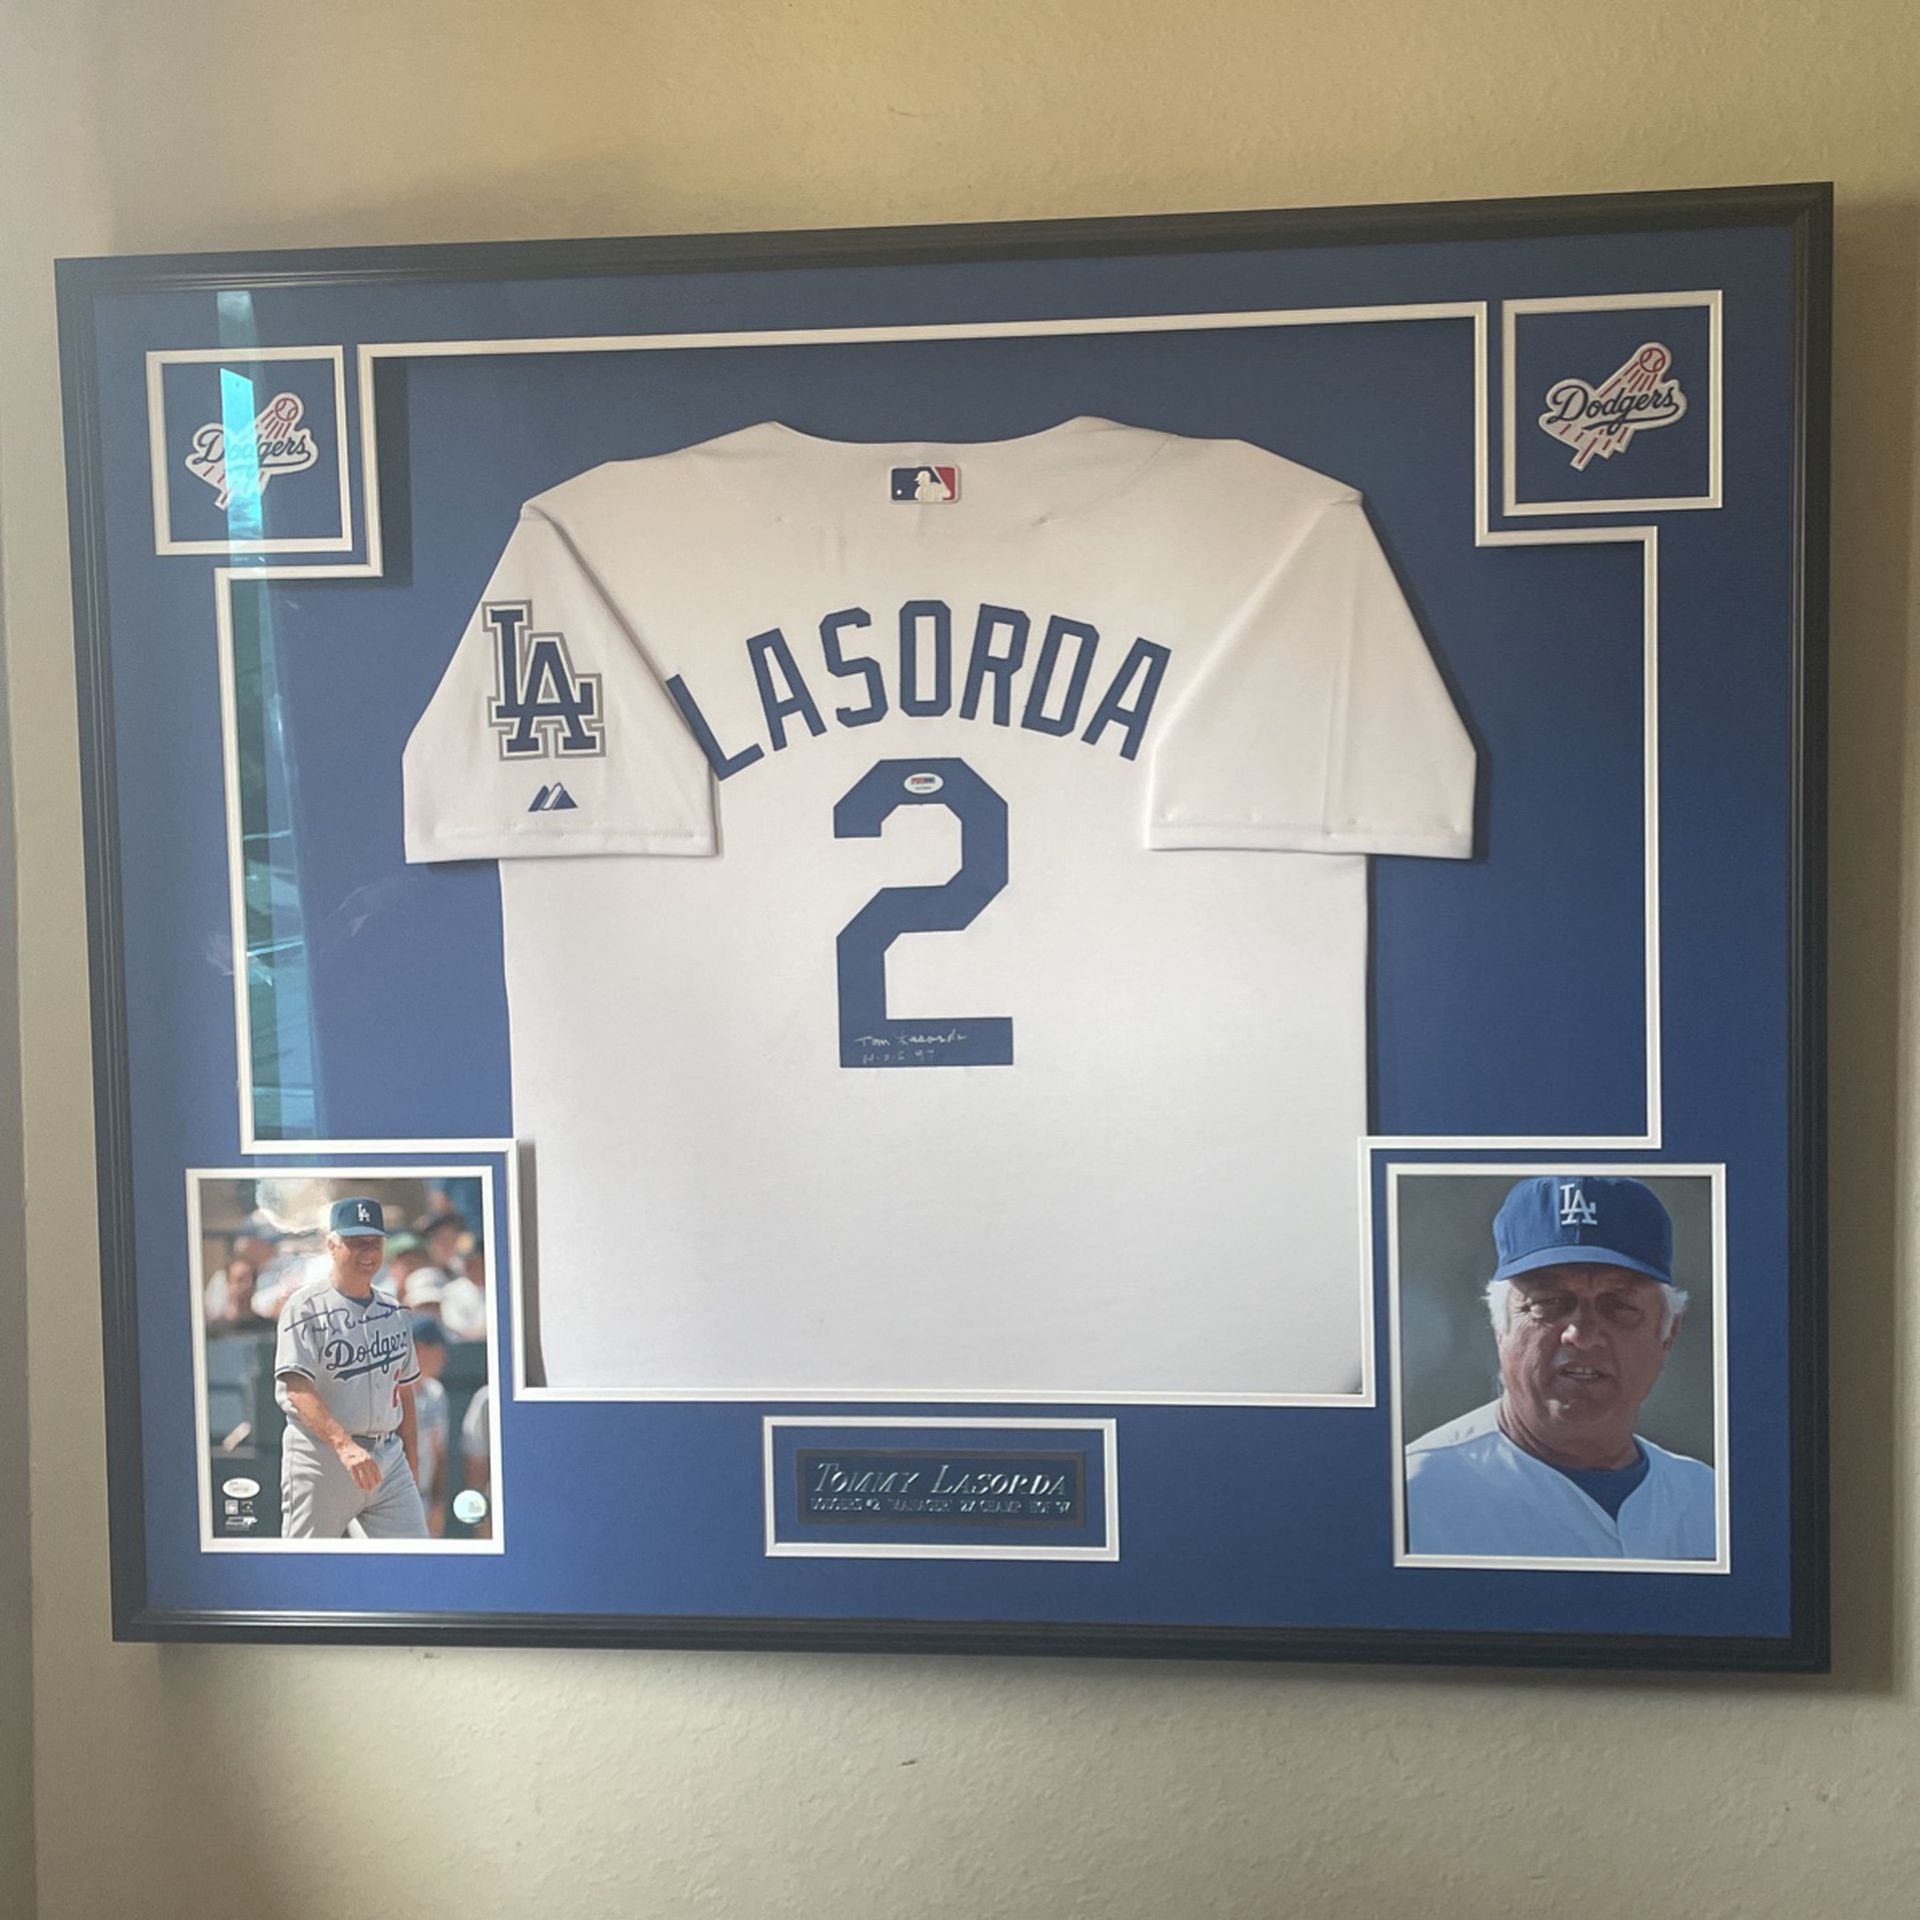 Tommy Lasorda Double Autographed Jersey JSA authenticated for